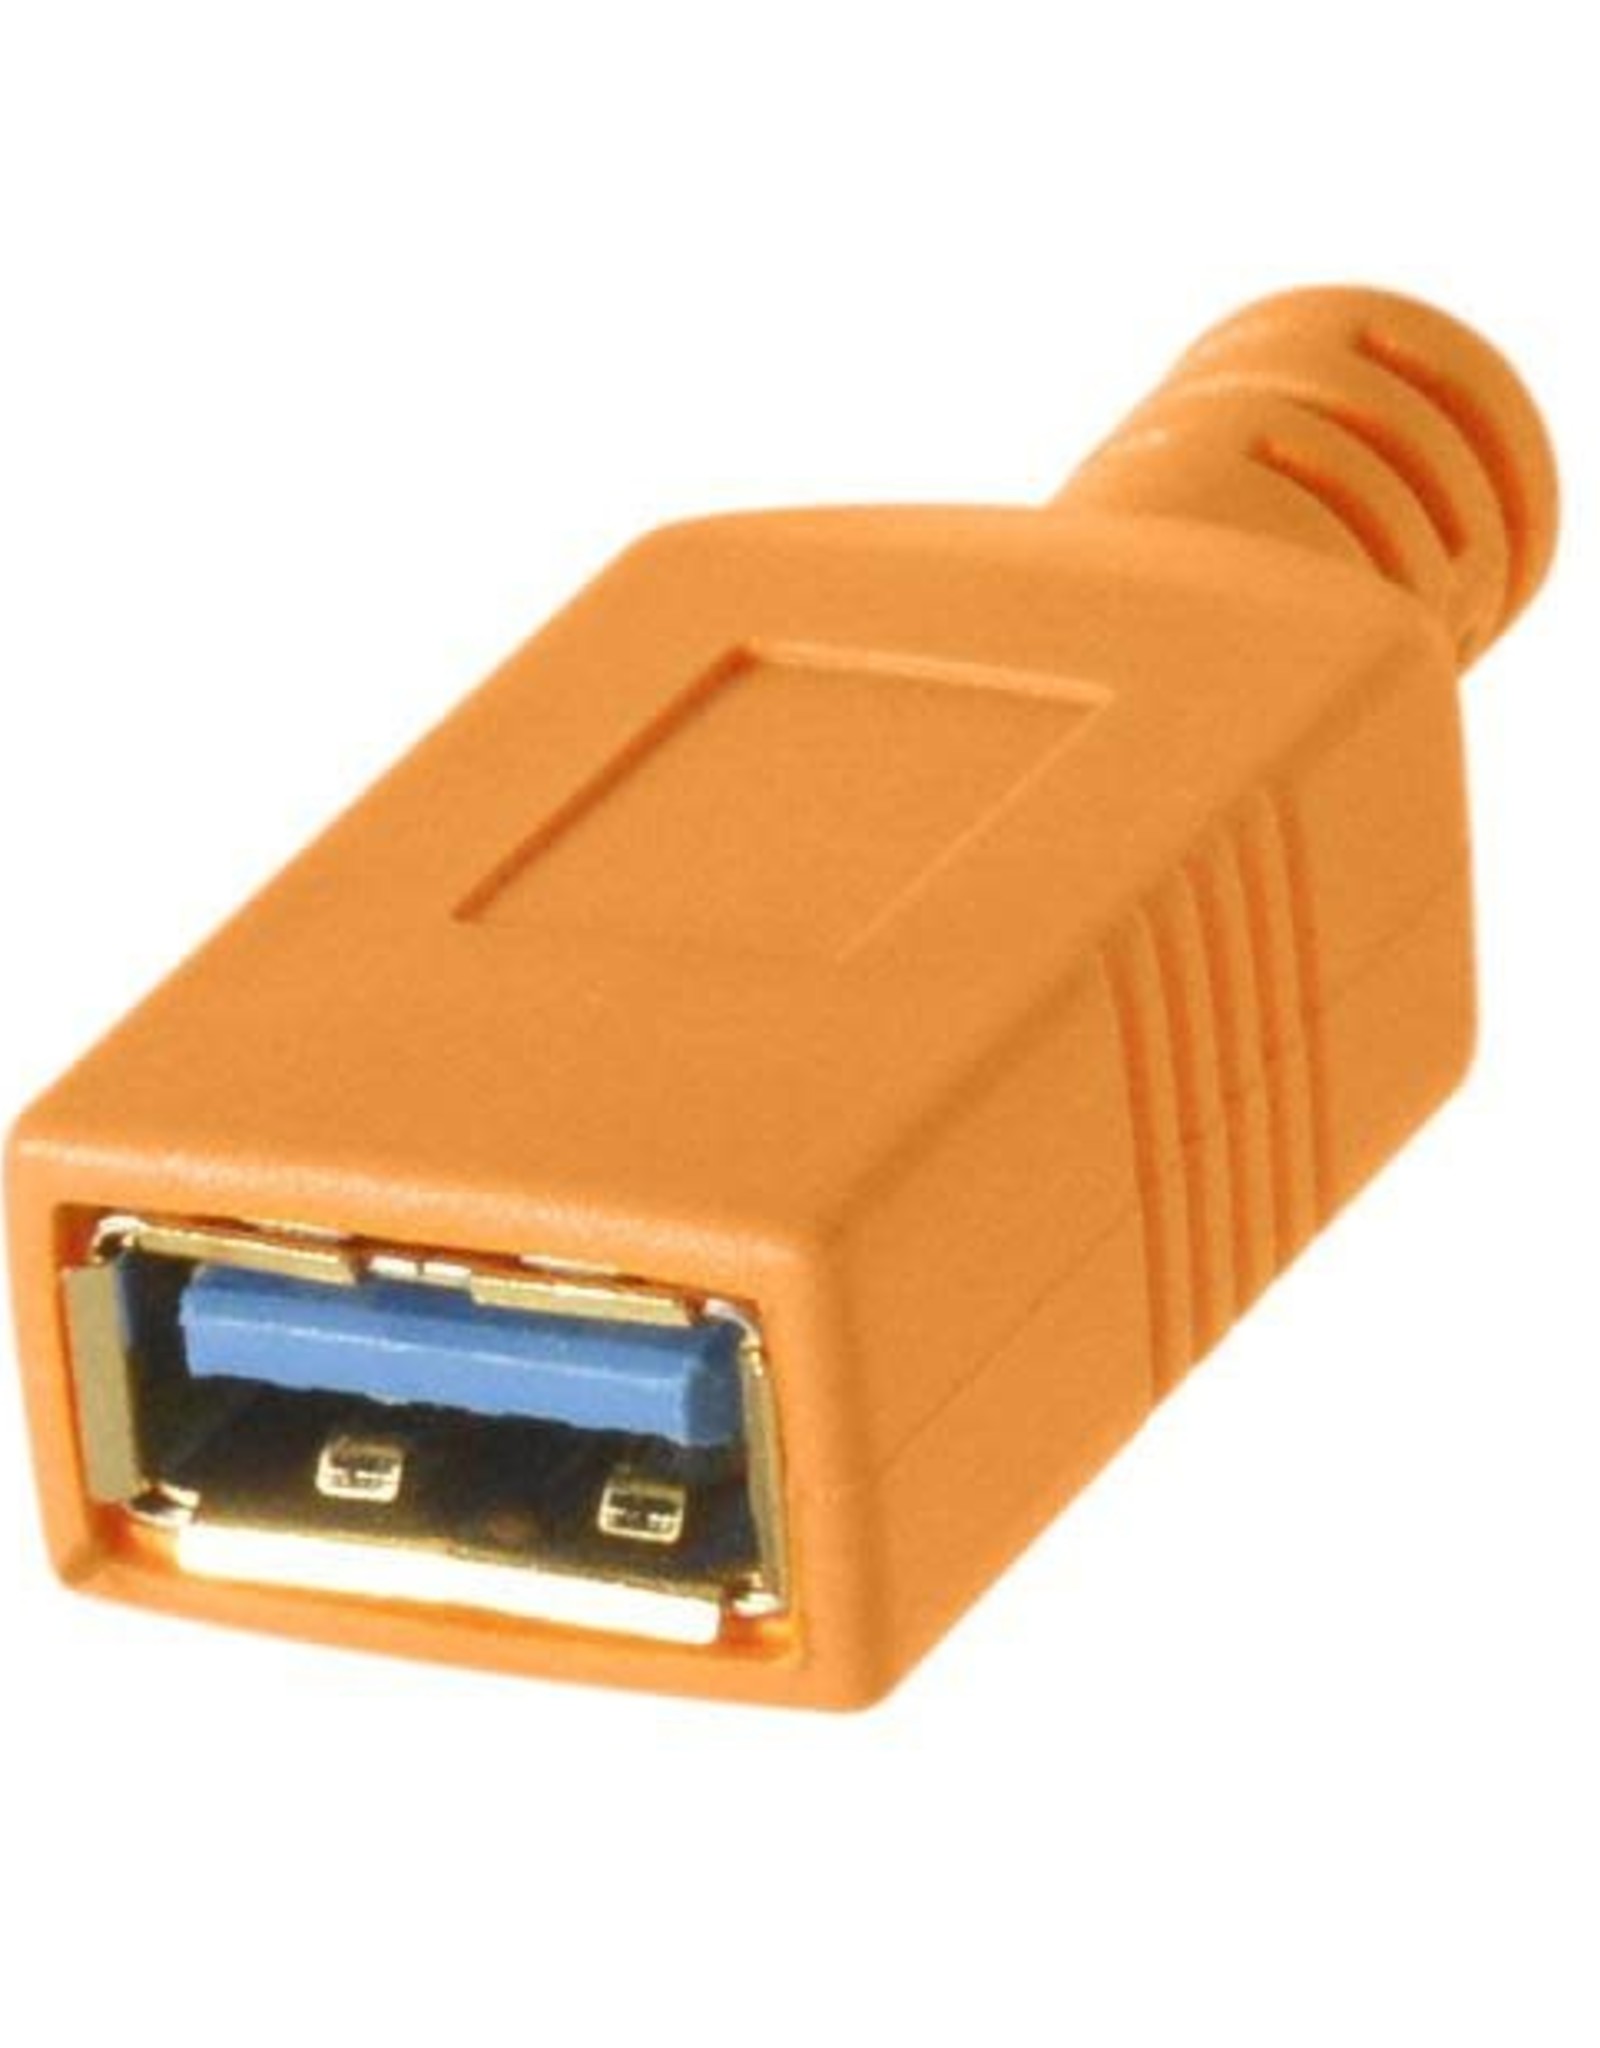 Tether Tools Tether Tools TetherPro USB-C to USB Female Adapter (extender), 15' (4.6m), High-Visibility Orange